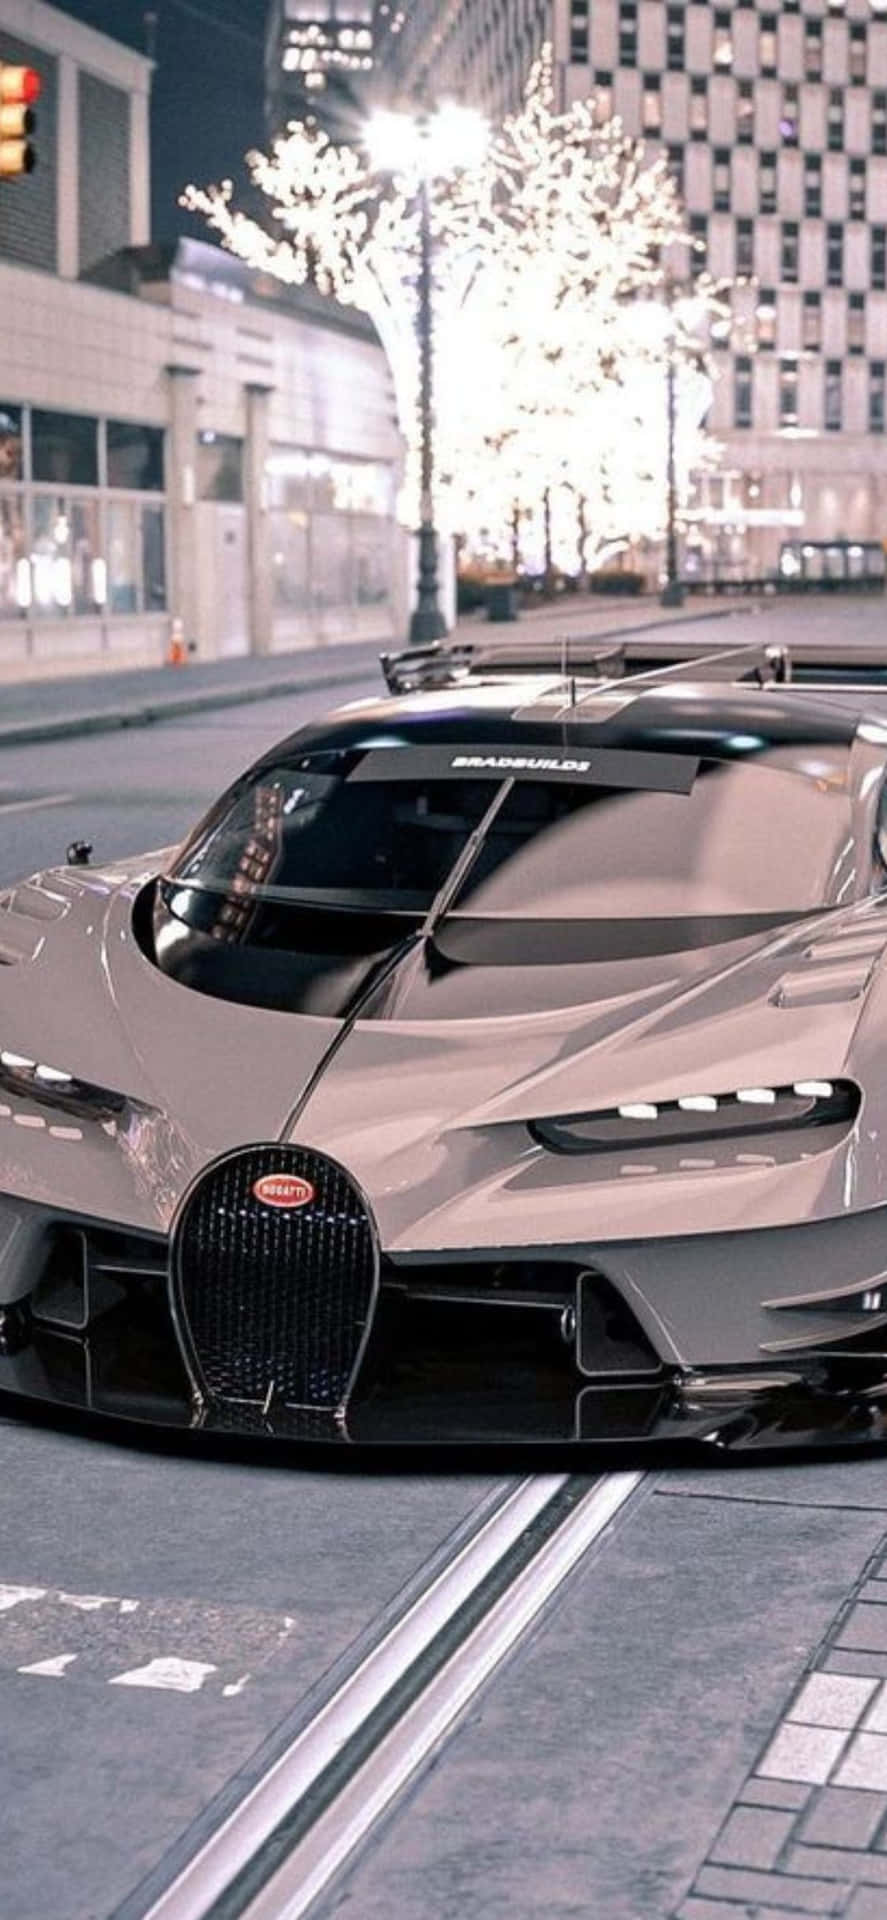 The style and speed of the iPhone Xs and Bugatti are incomparable